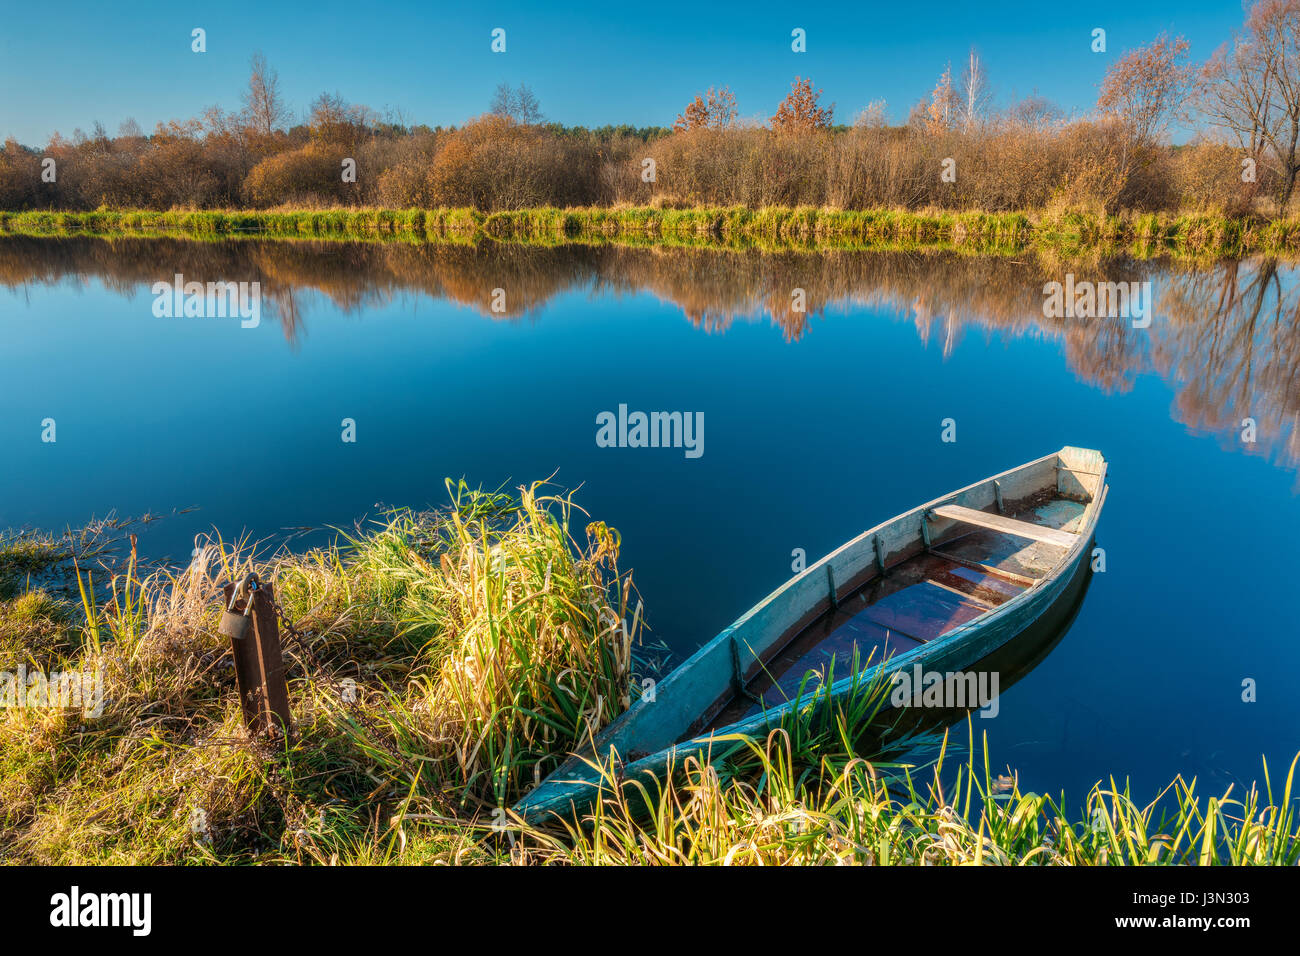 The Picturesque Autumn Fall River Landscape, Yellowed Bank Of River With One Tied Up Wooden Small Blue Fishing Rowboat Skippet On The Motionless Water Stock Photo